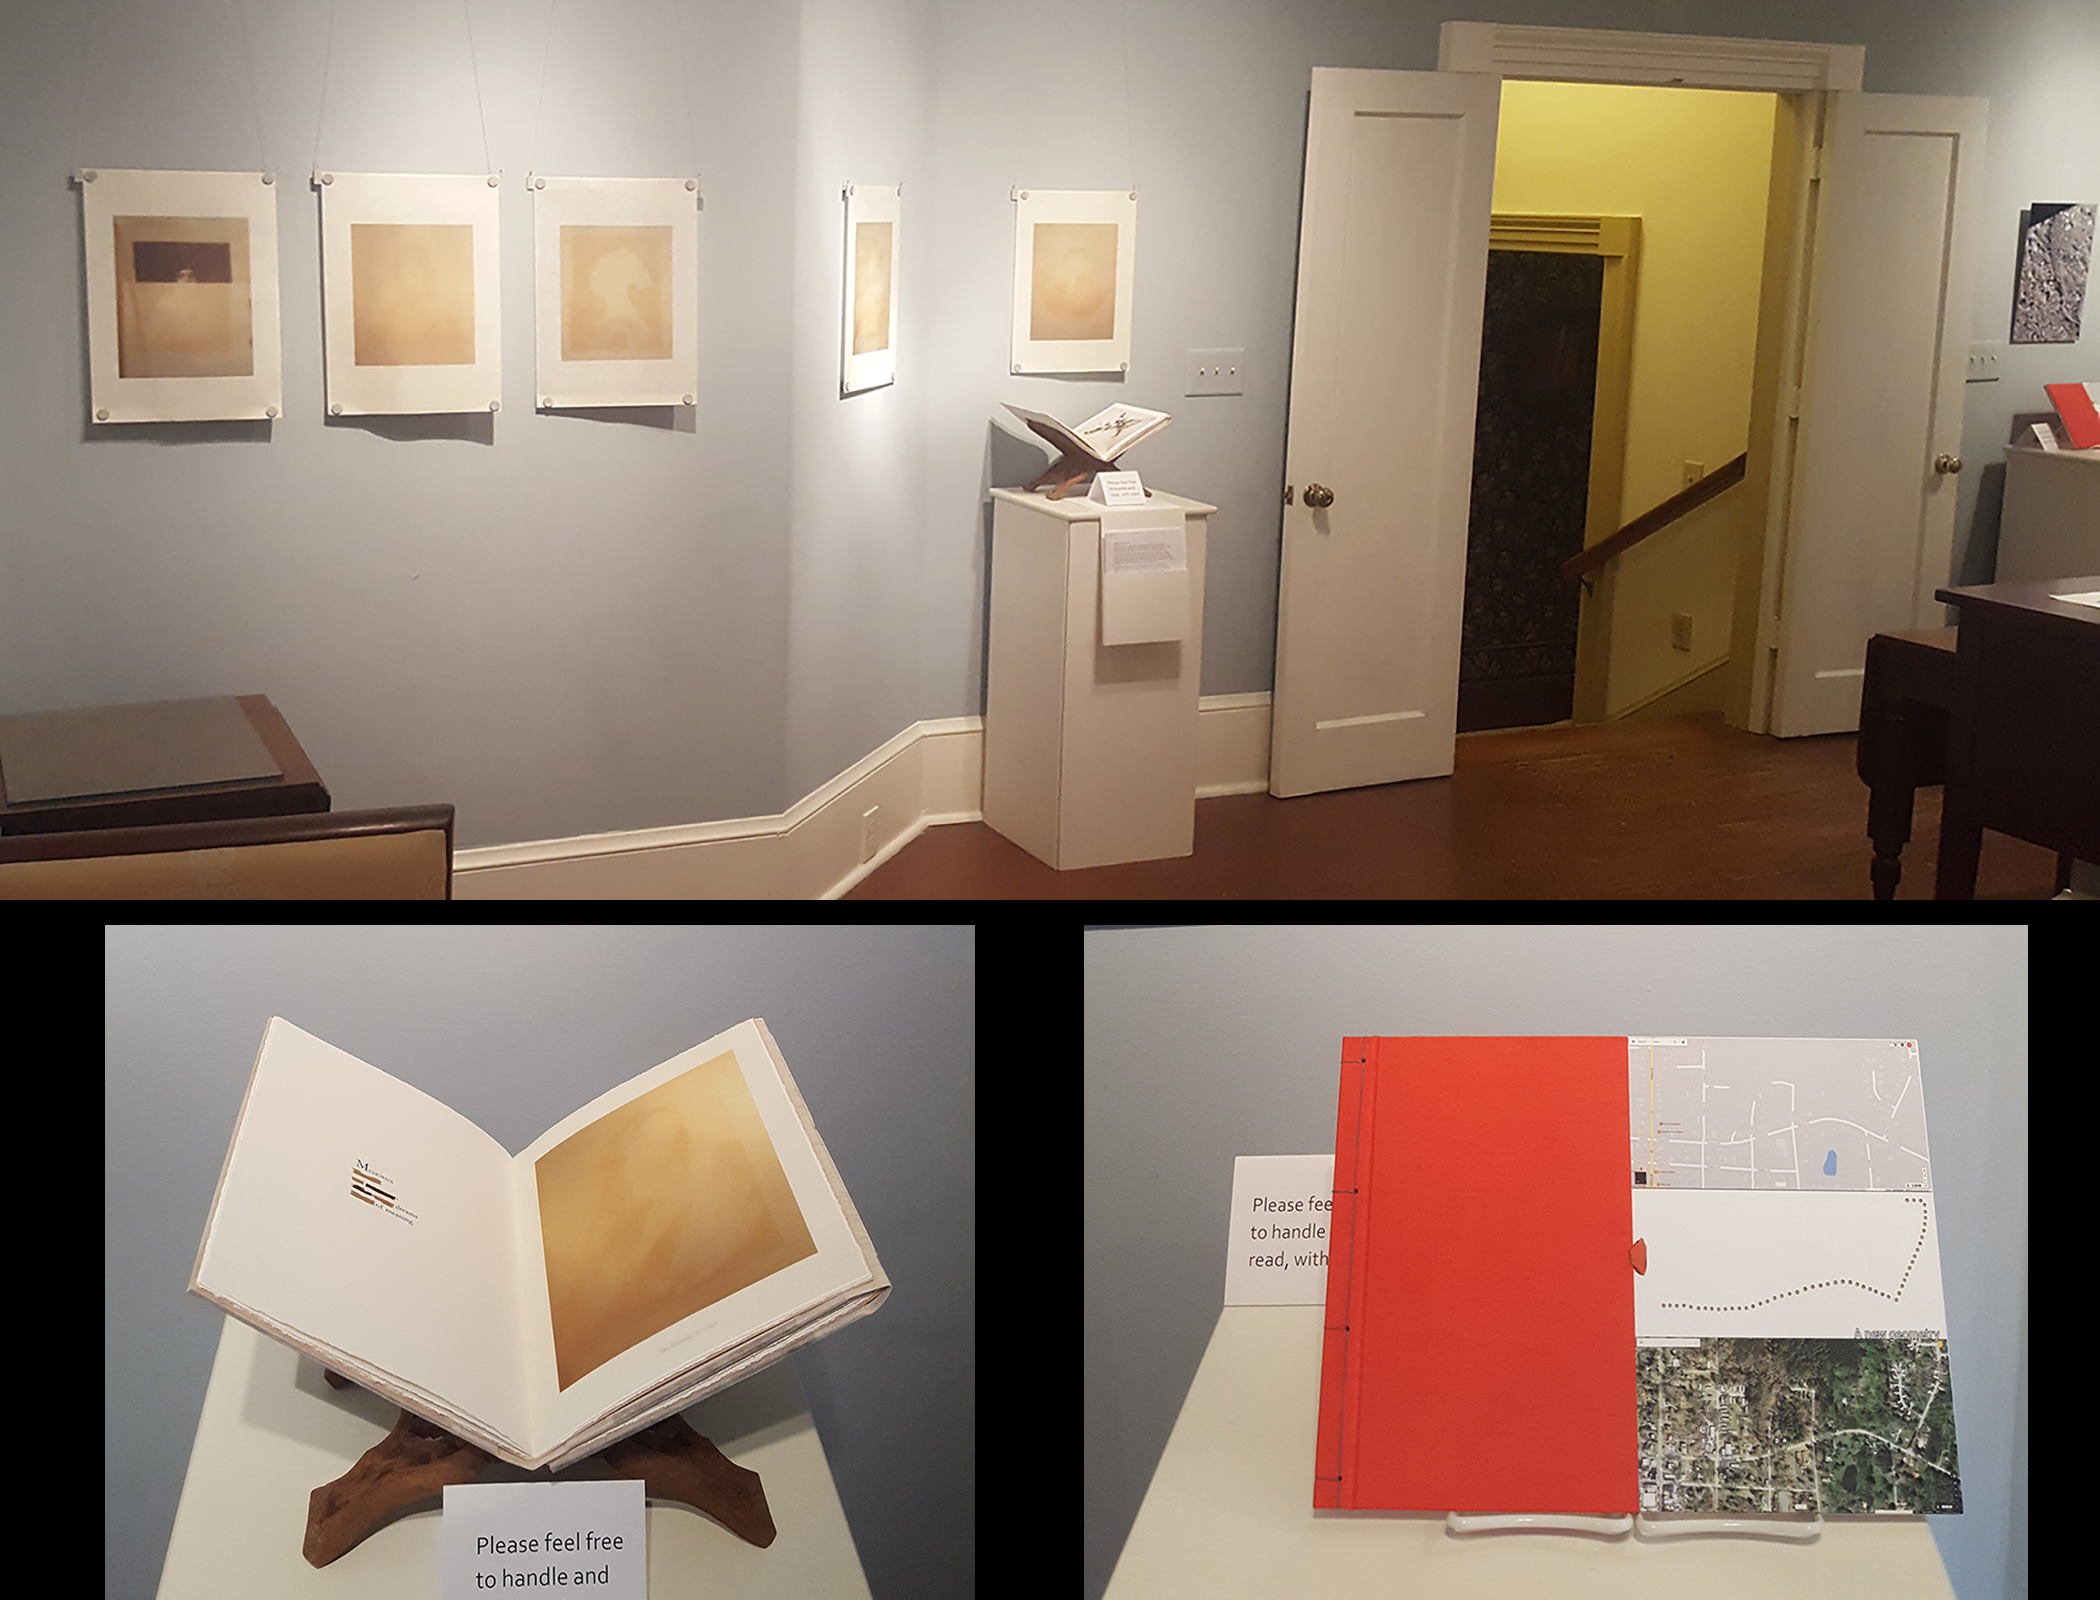 Three images from an art exhibit. Prints hanging on a wall, and two books open on pedestals